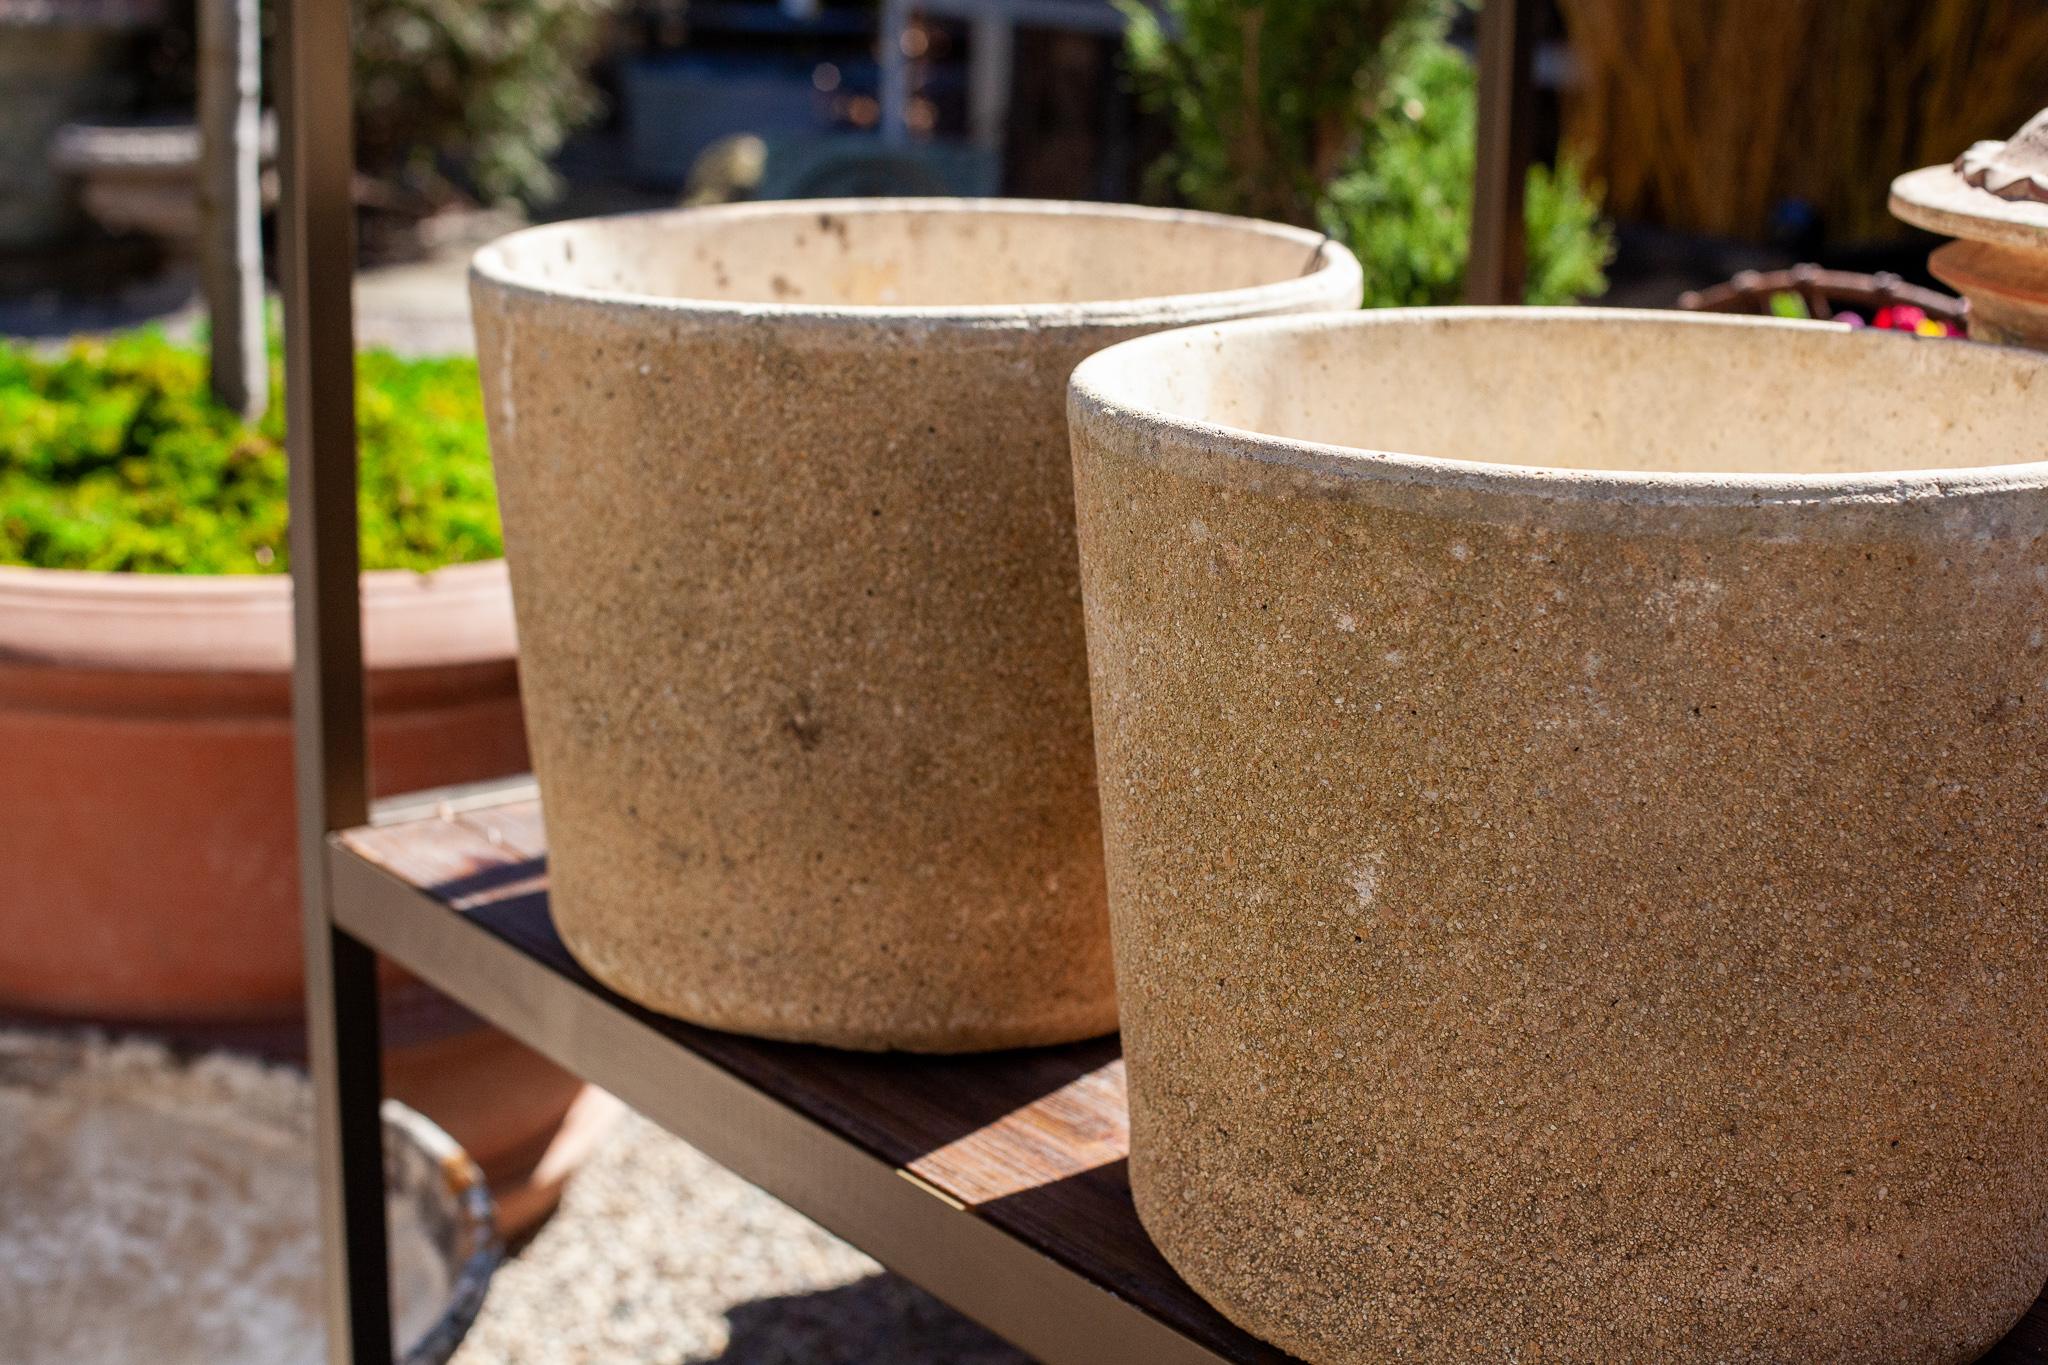 Fleurdetroit presents this pair of composite-stone planters for your consideration. 

Marked by the hands of time, the patina on these vintage, composite stone, garden planters adds to their sleek and modern feel. Perfectly suited for a place of